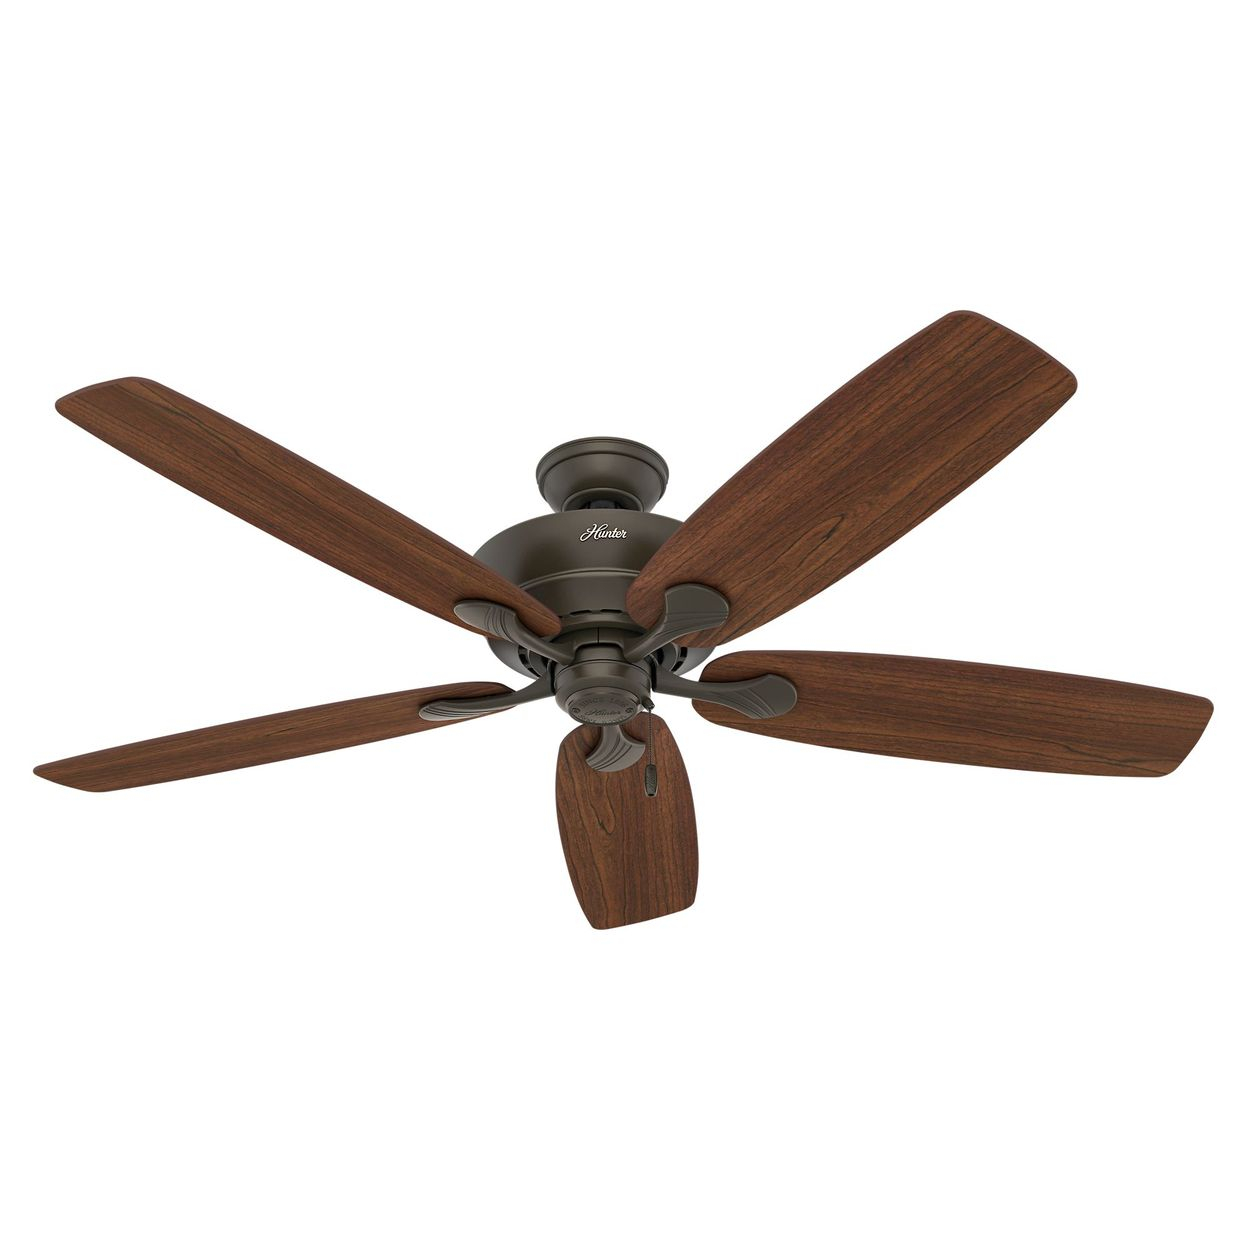 Regalia Ii 60 In Satin Bronze Led Indoor Ceiling Fan With Light Kit 5 Blade within dimensions 1250 X 1250